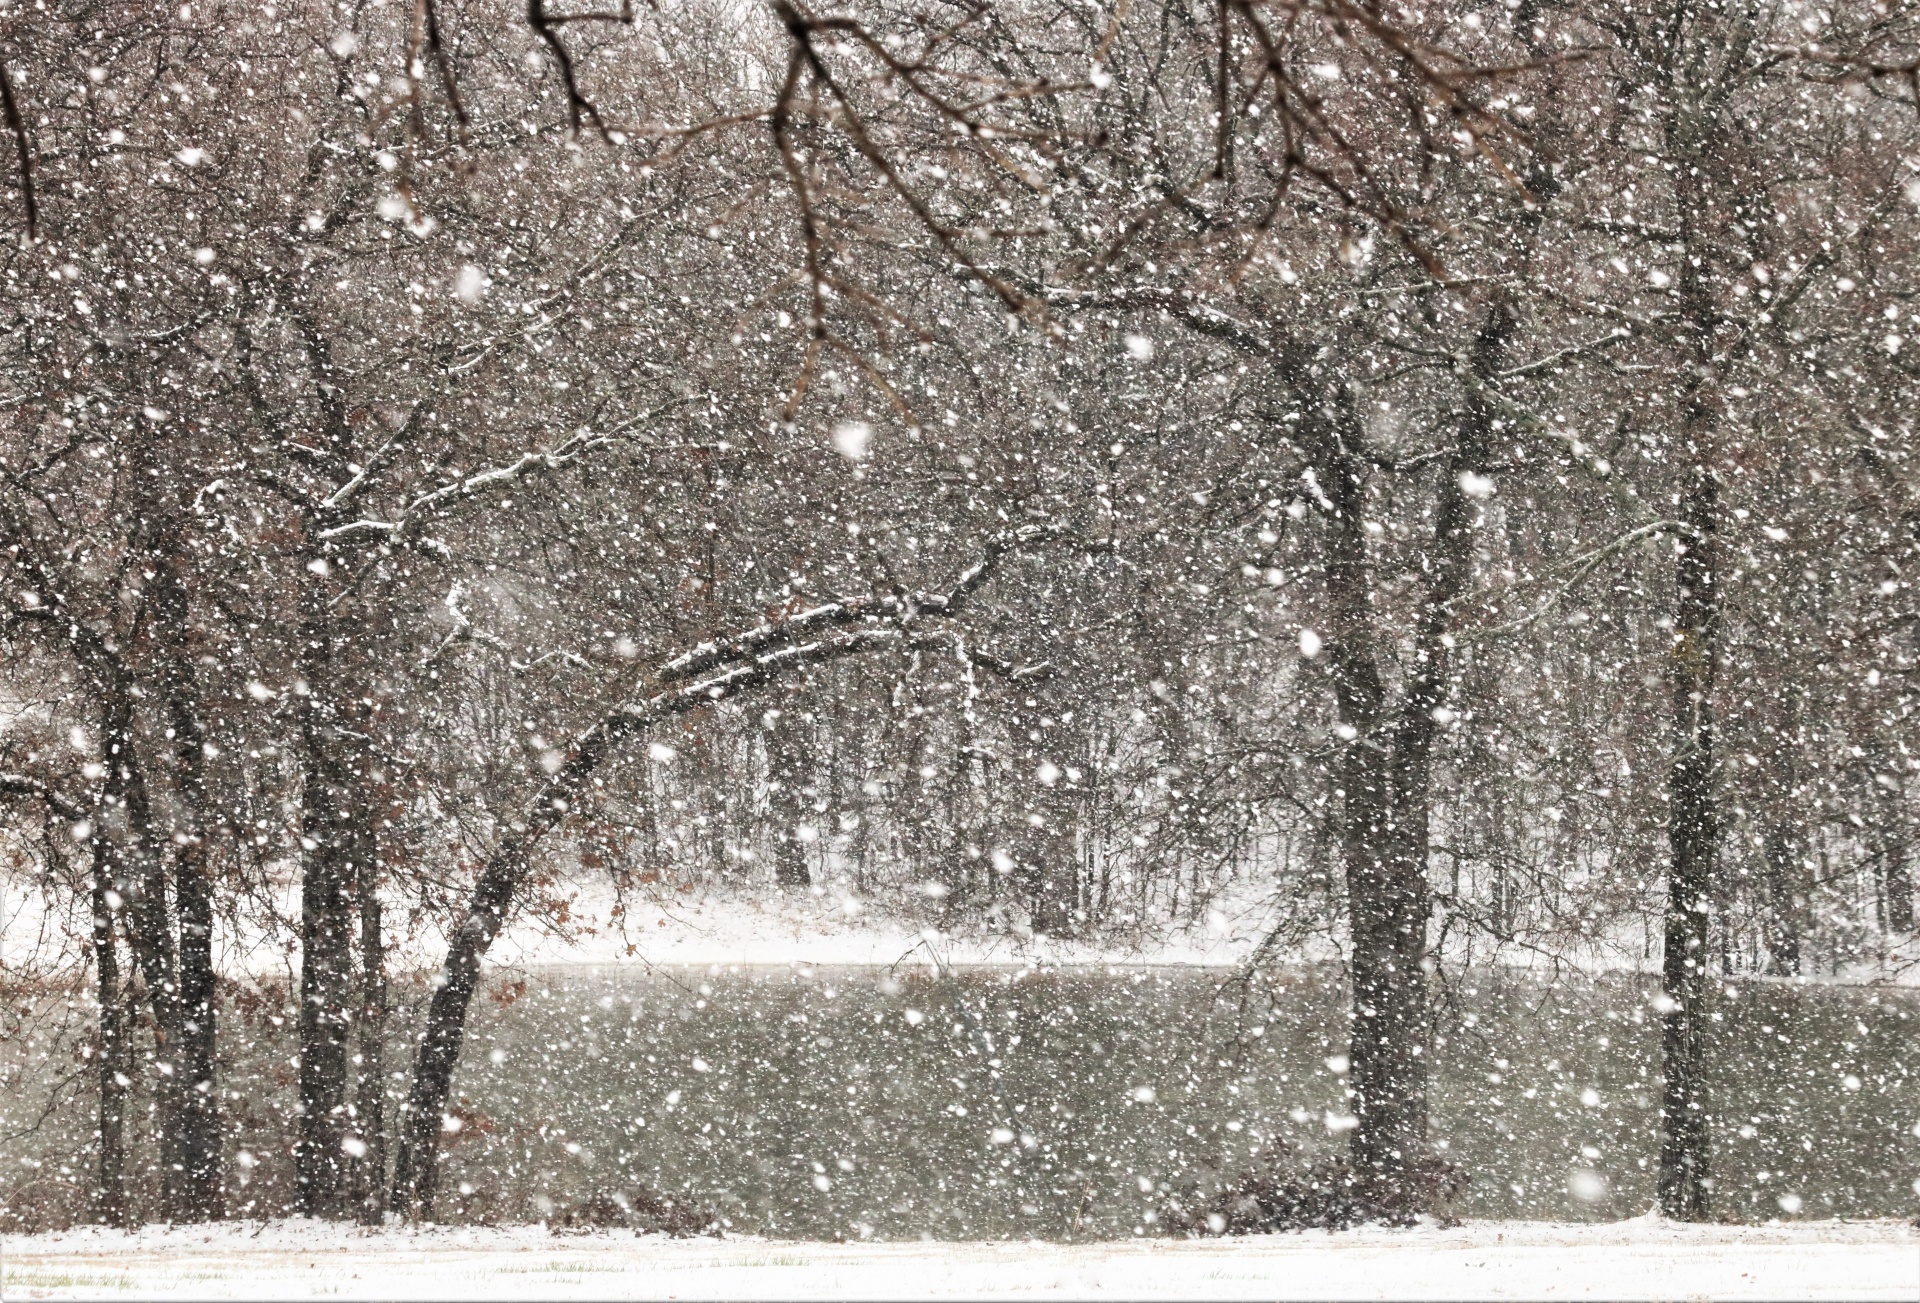 View of a small pond in the woods, through the falling snow.